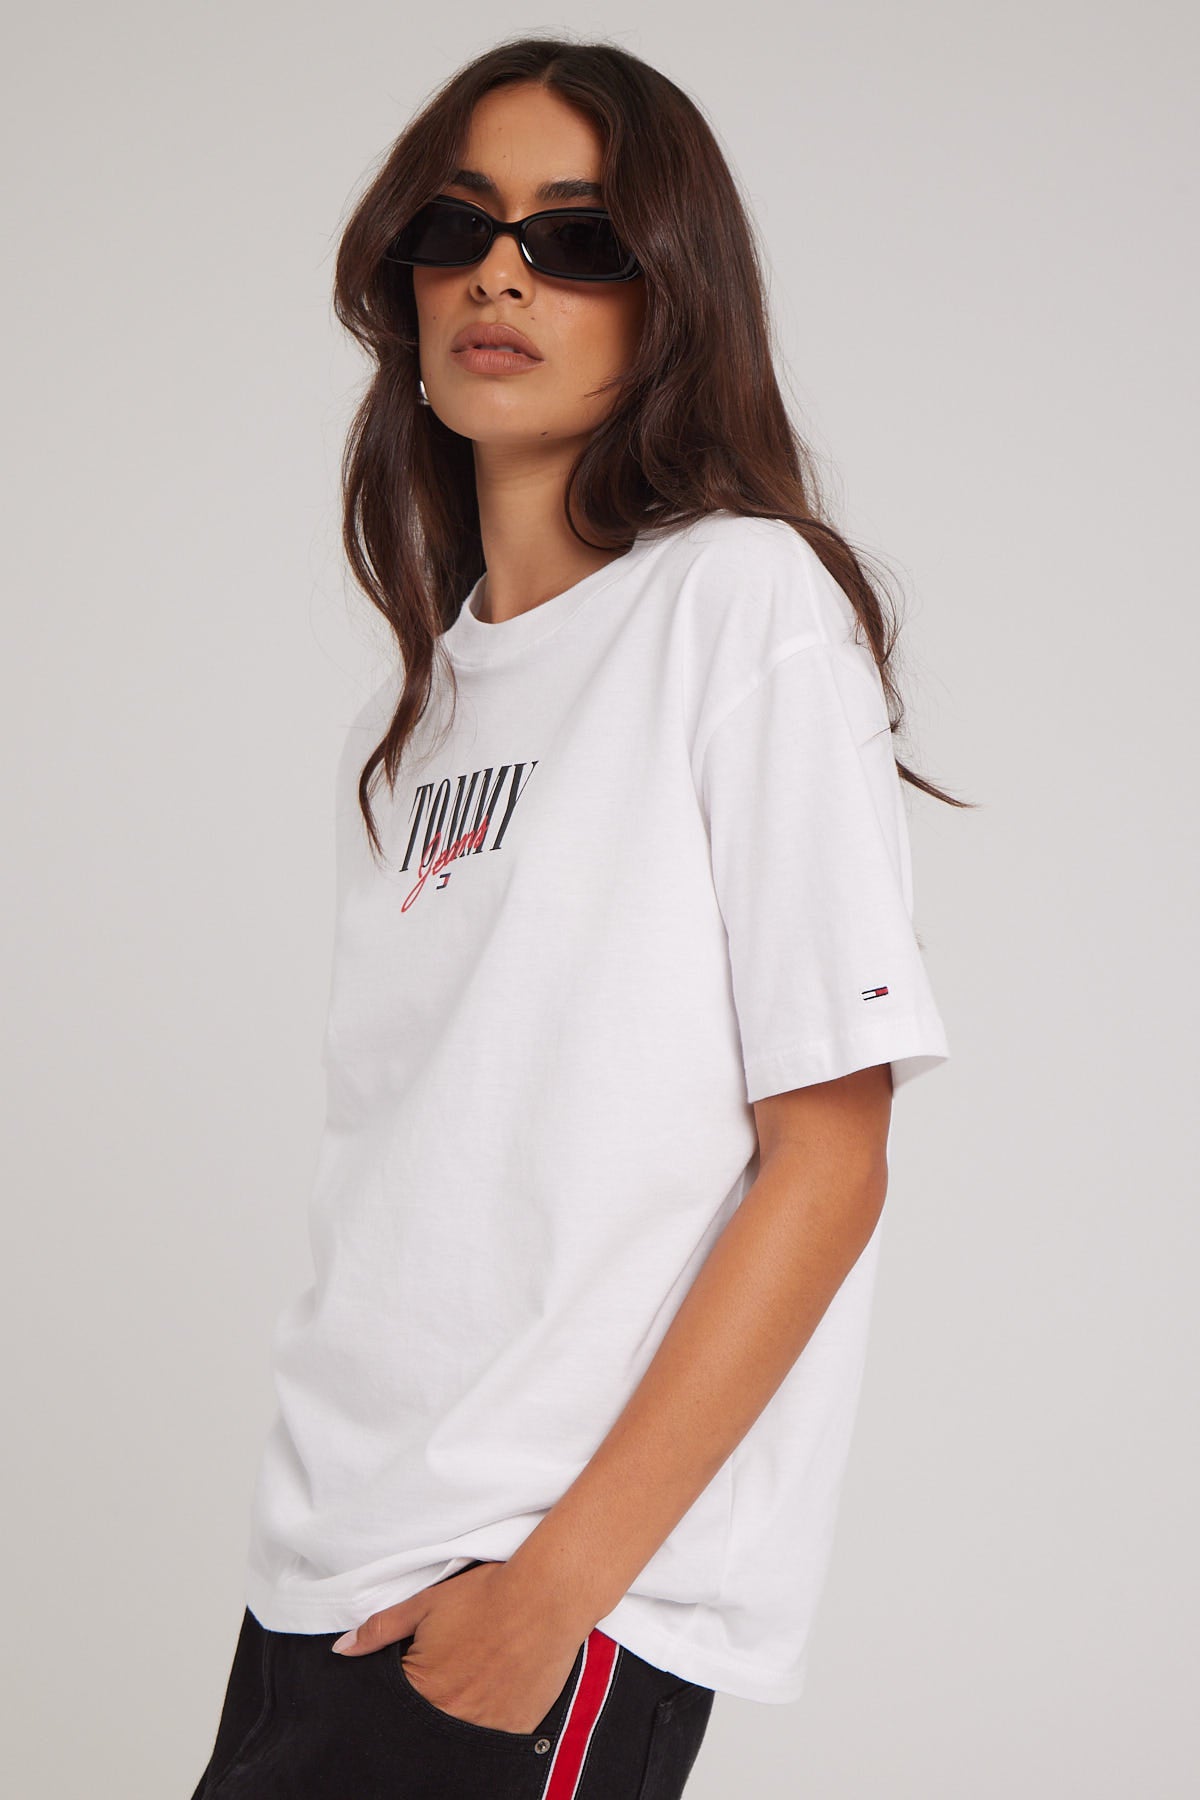 Tommy Jeans Relaxed Essential Logo Tee Black